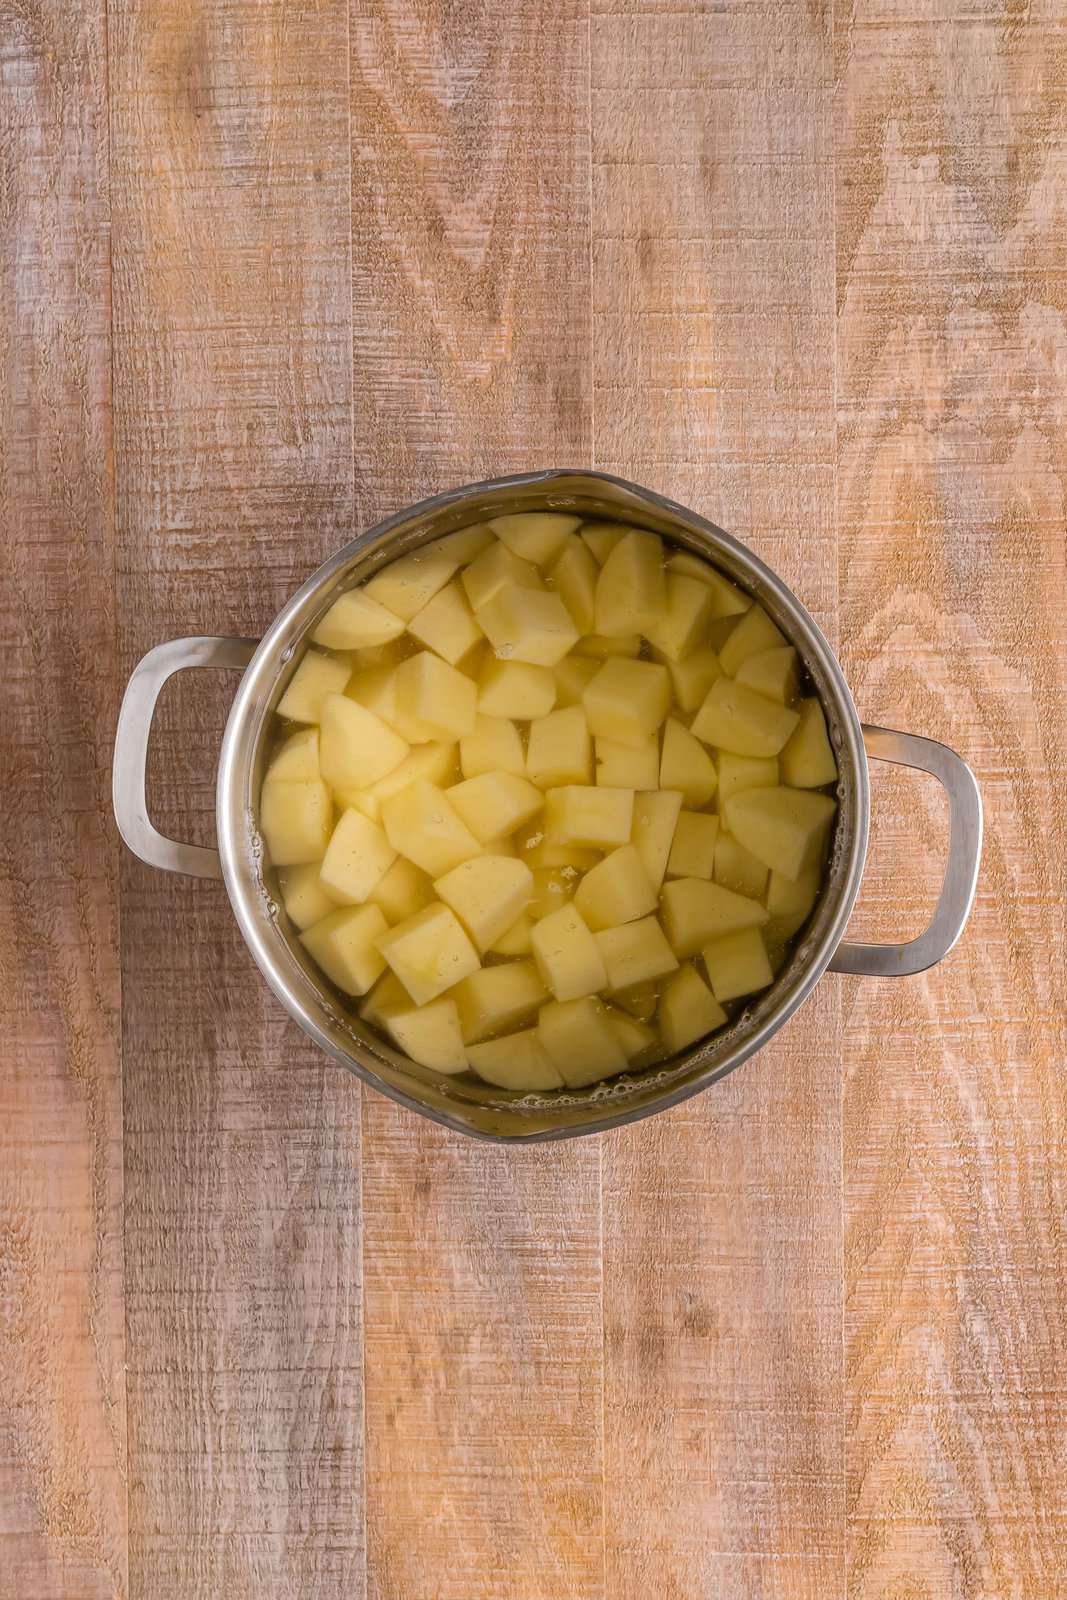 A pot with potatoes waiting to be boiled.